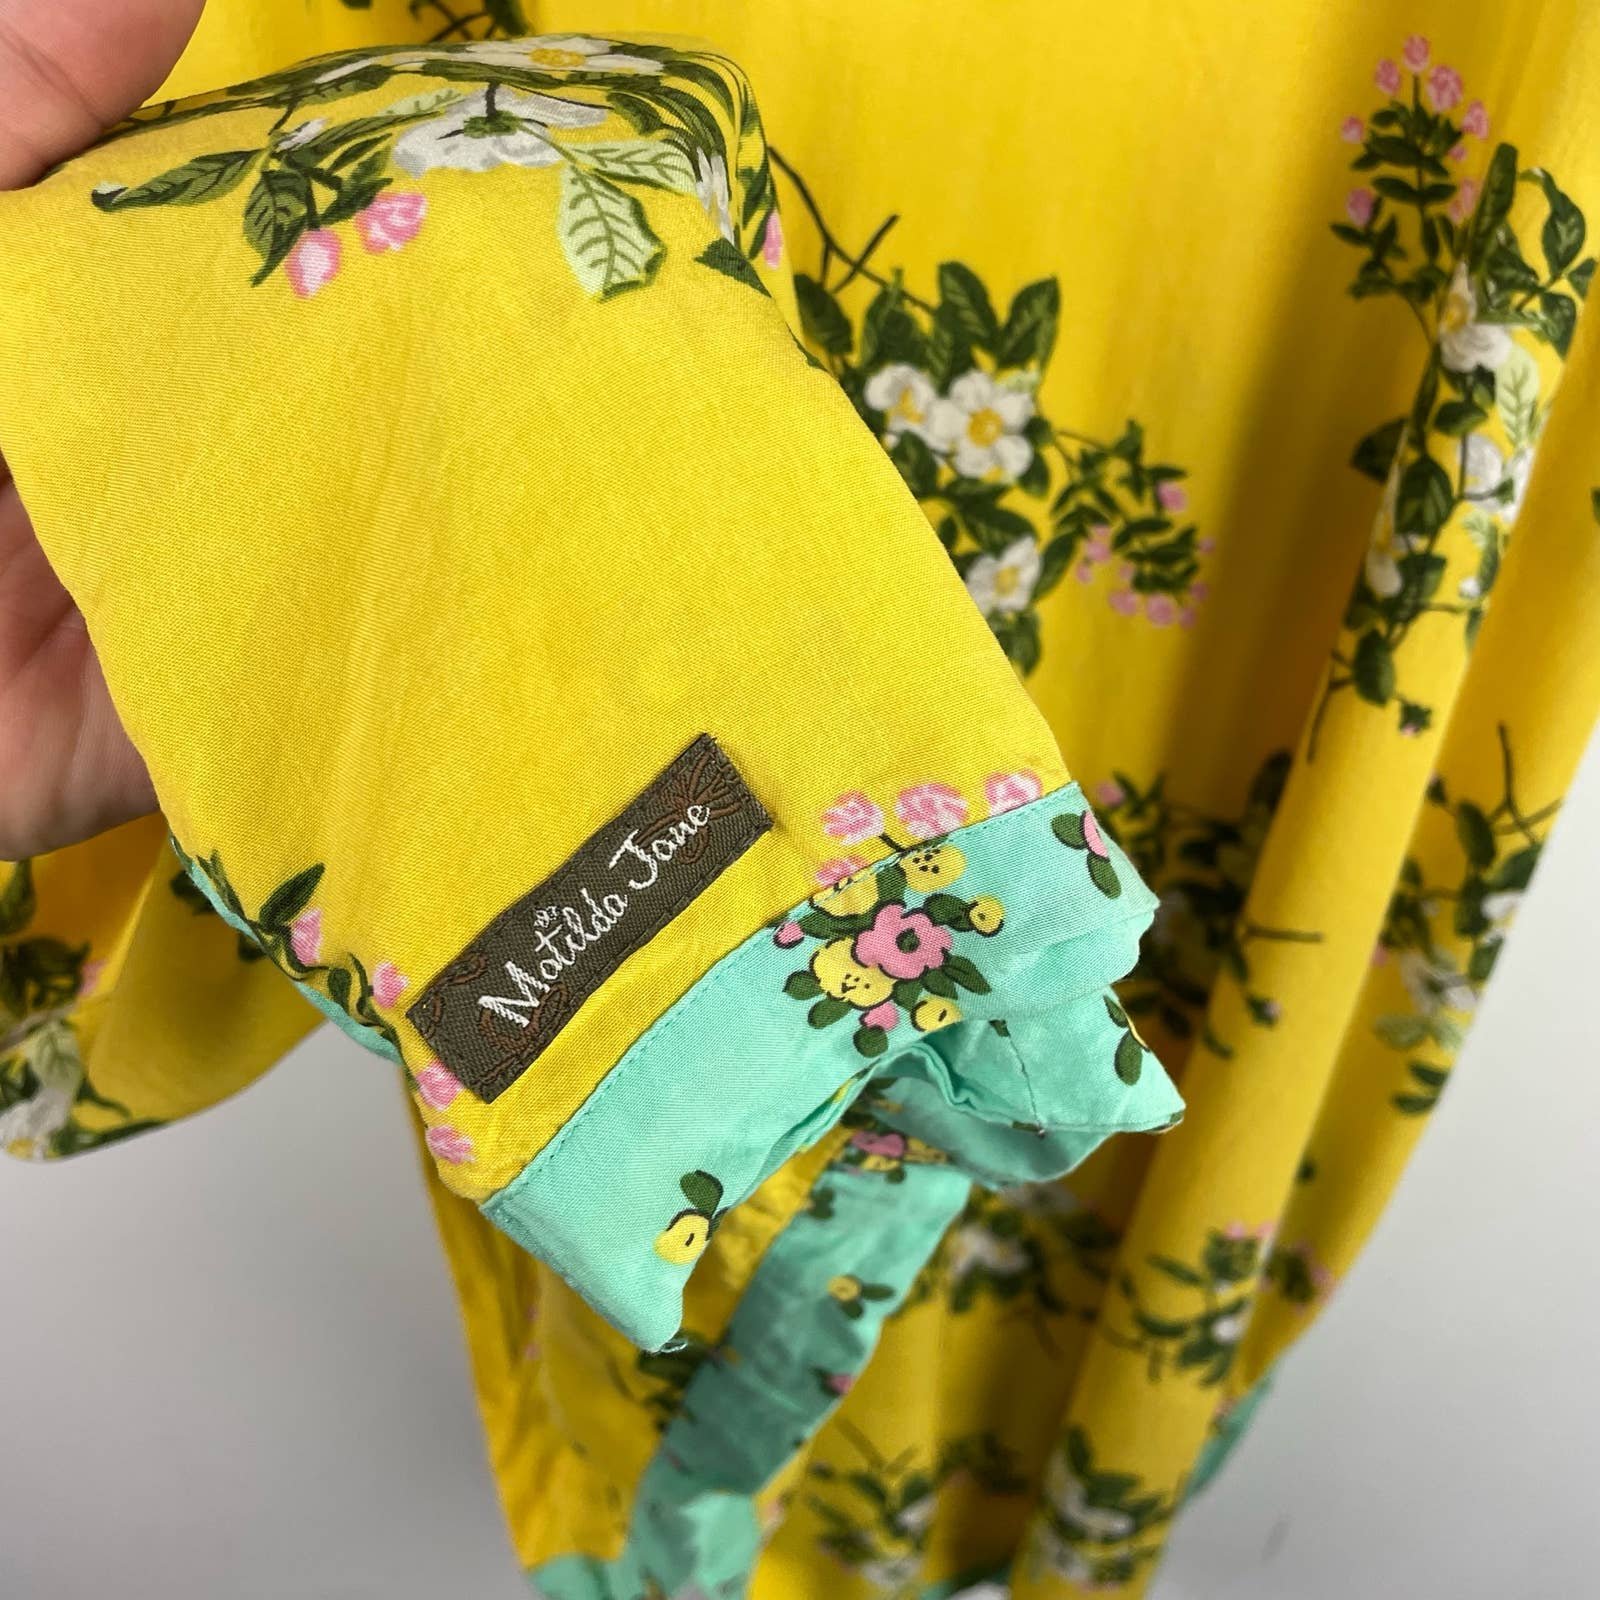 Promotions  Matilda Jane Yellow Teal Floral Kimono Size Med/Large jxXcjGGE2 well sale